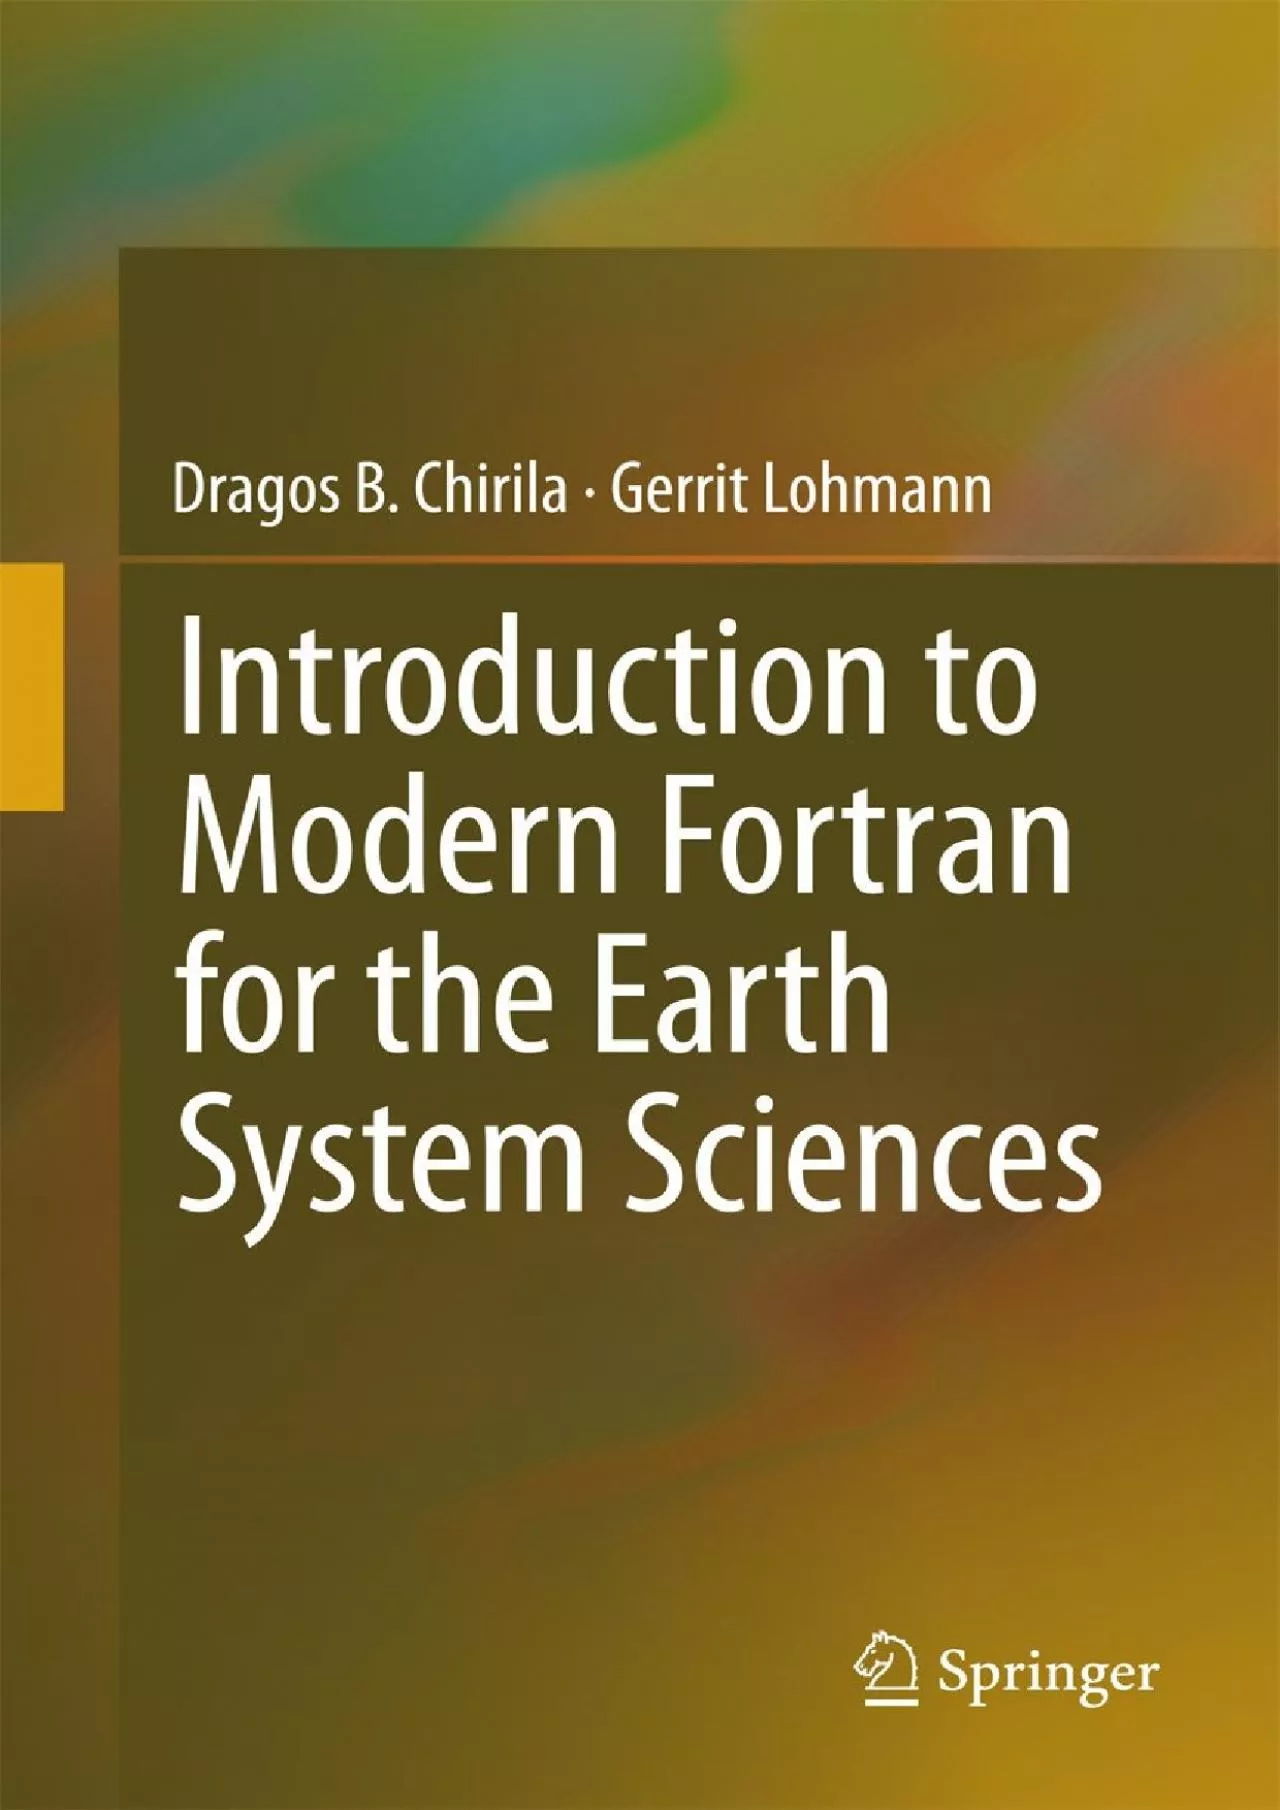 [FREE]-Introduction to Modern Fortran for the Earth System Sciences (Springerbriefs in